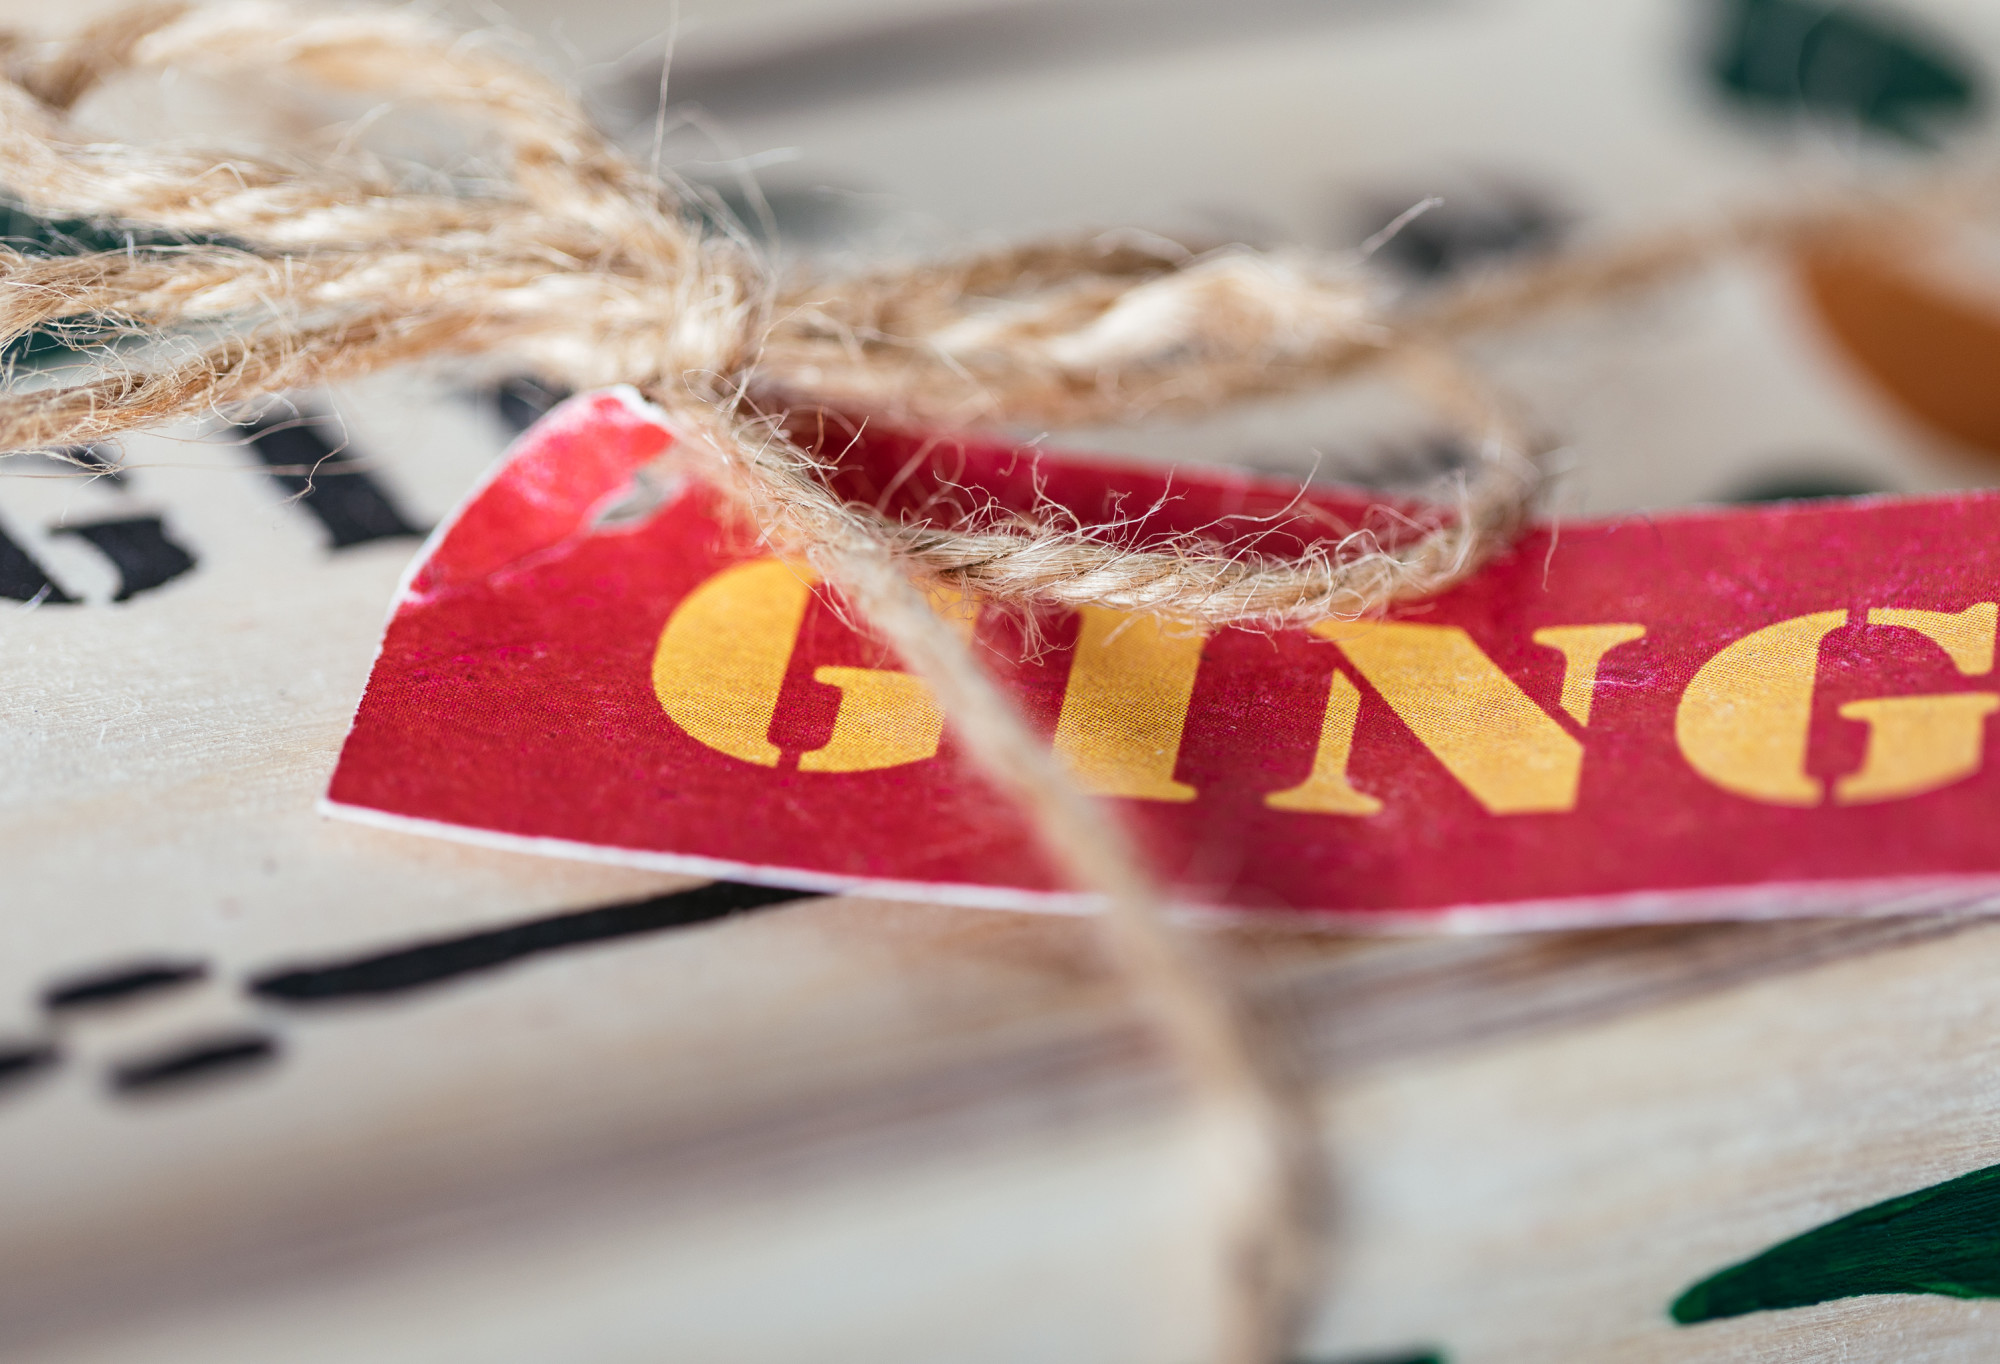 A close up of a red paper gift tag, with Ginger written on it in yellow writing, with a brown piece of string tied to it.